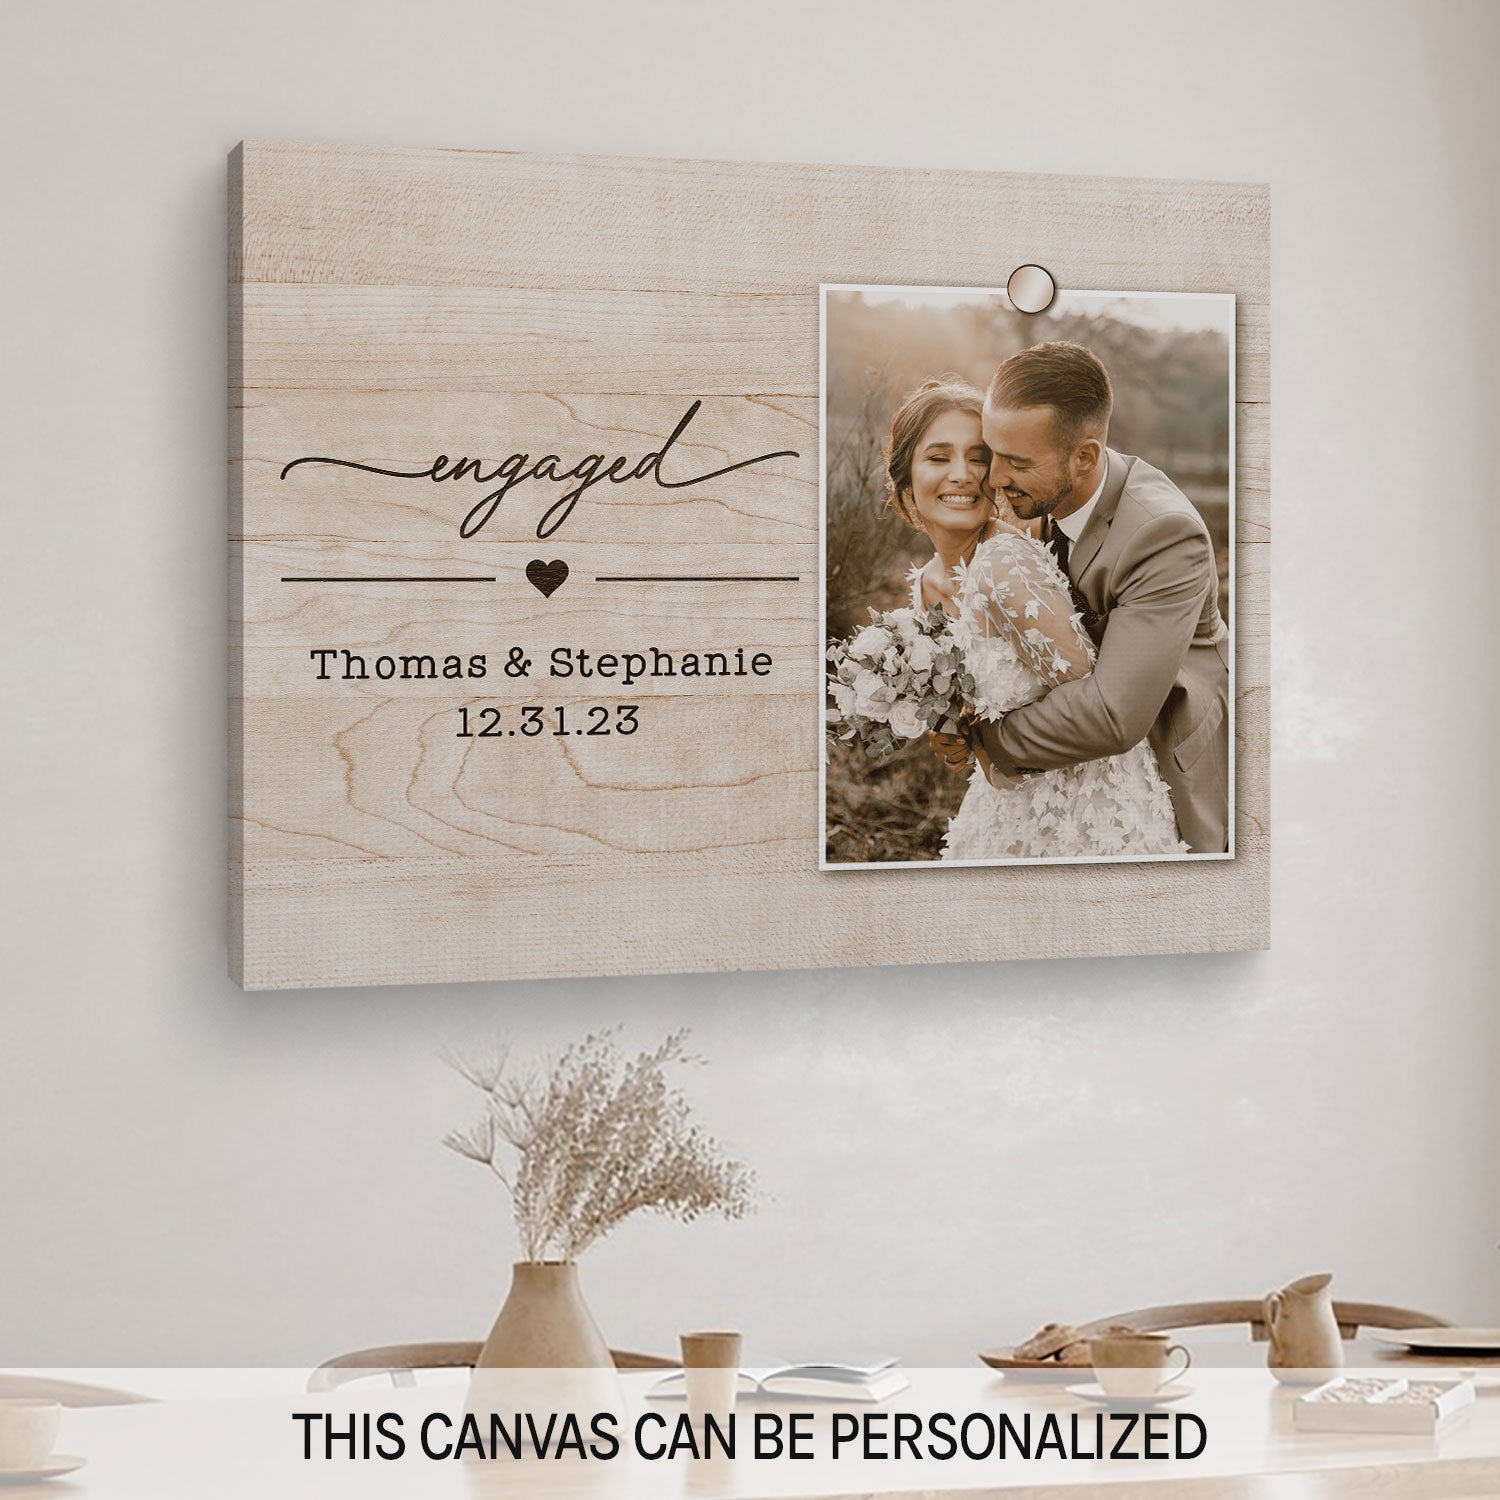 Engaged - Personalized Engagement or Valentine's Day gift For Fiance - Custom Canvas Print - MyMindfulGifts